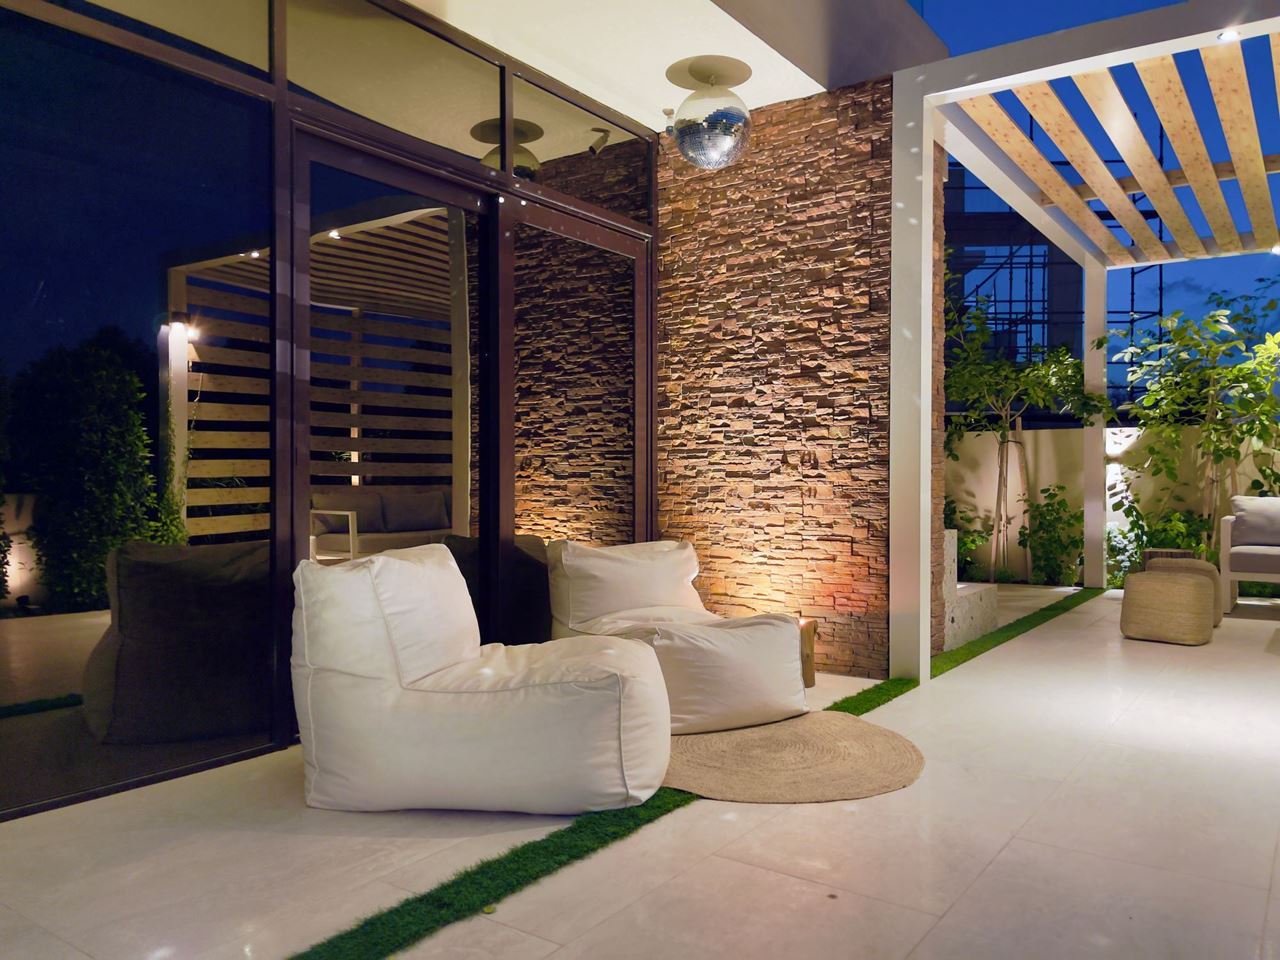 Green Gardenia Landscaping LLC are Turning Spaces into an Oasis of Serenity in Dubai